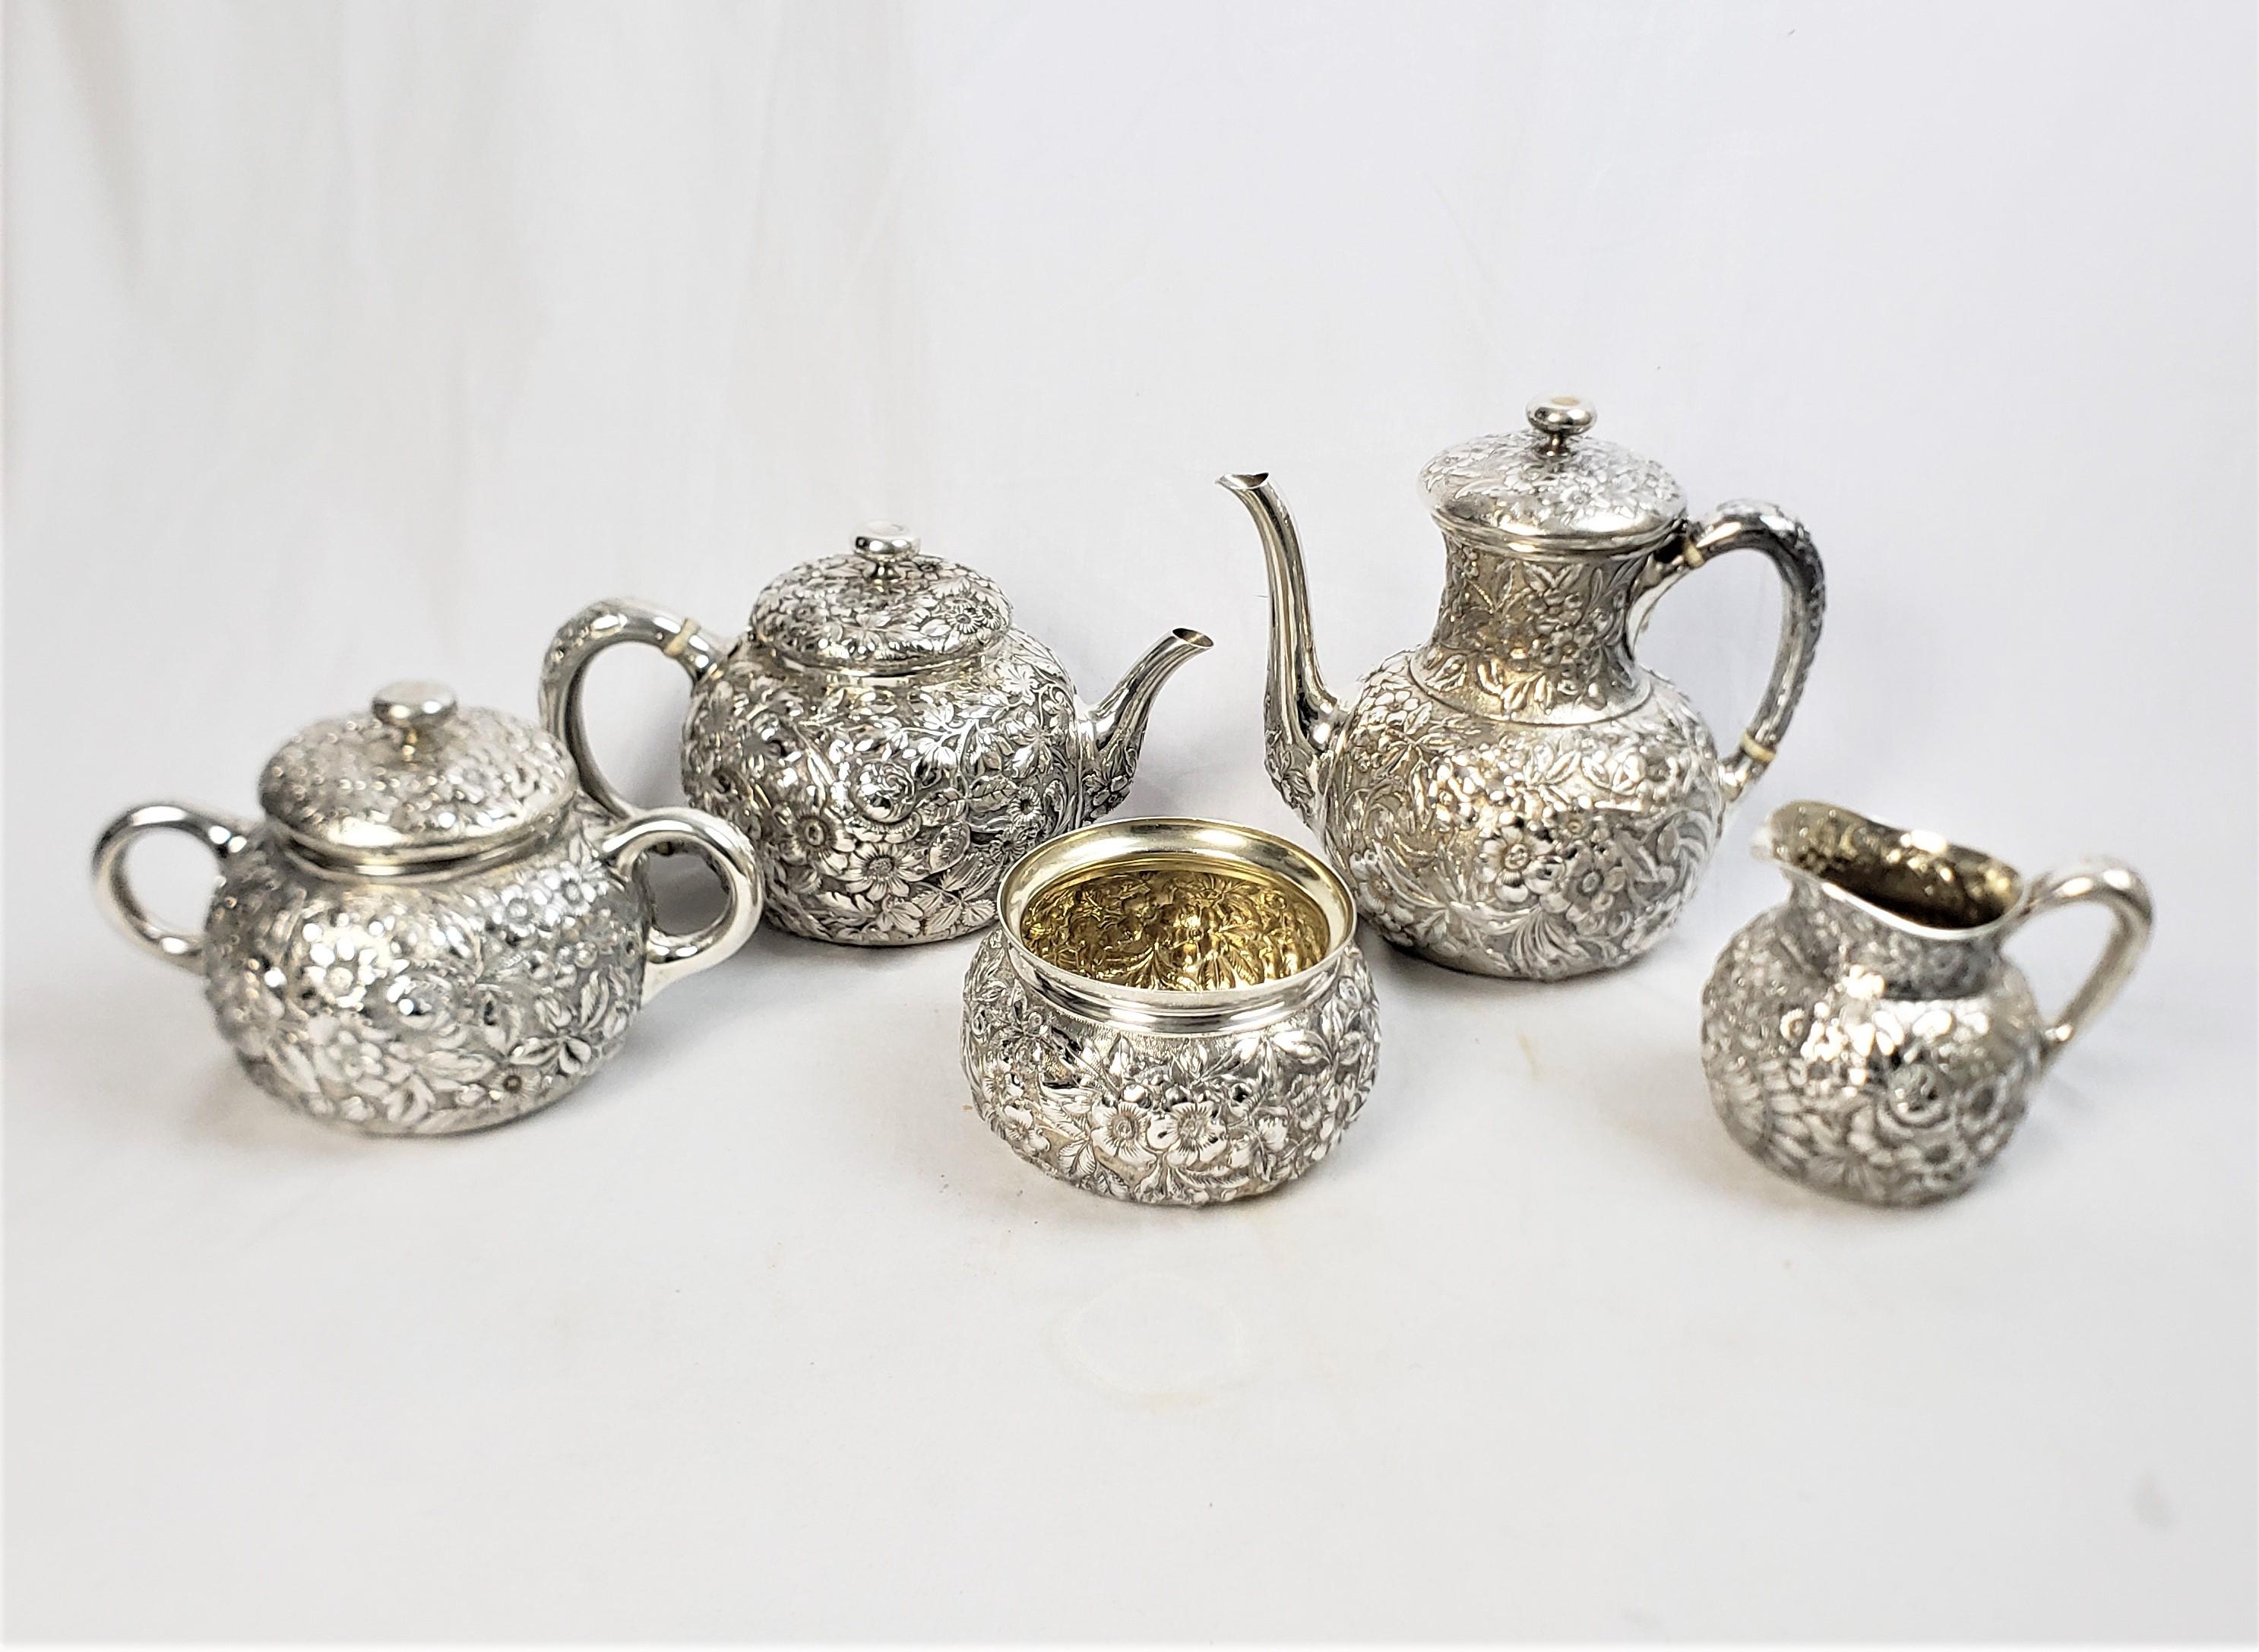 This antique five piece tea set was made by Whiting & Co. of the United States and dates to approximately 1900 and done in a period Victorian style. The set is composed of sterling silver and is done in their signature 